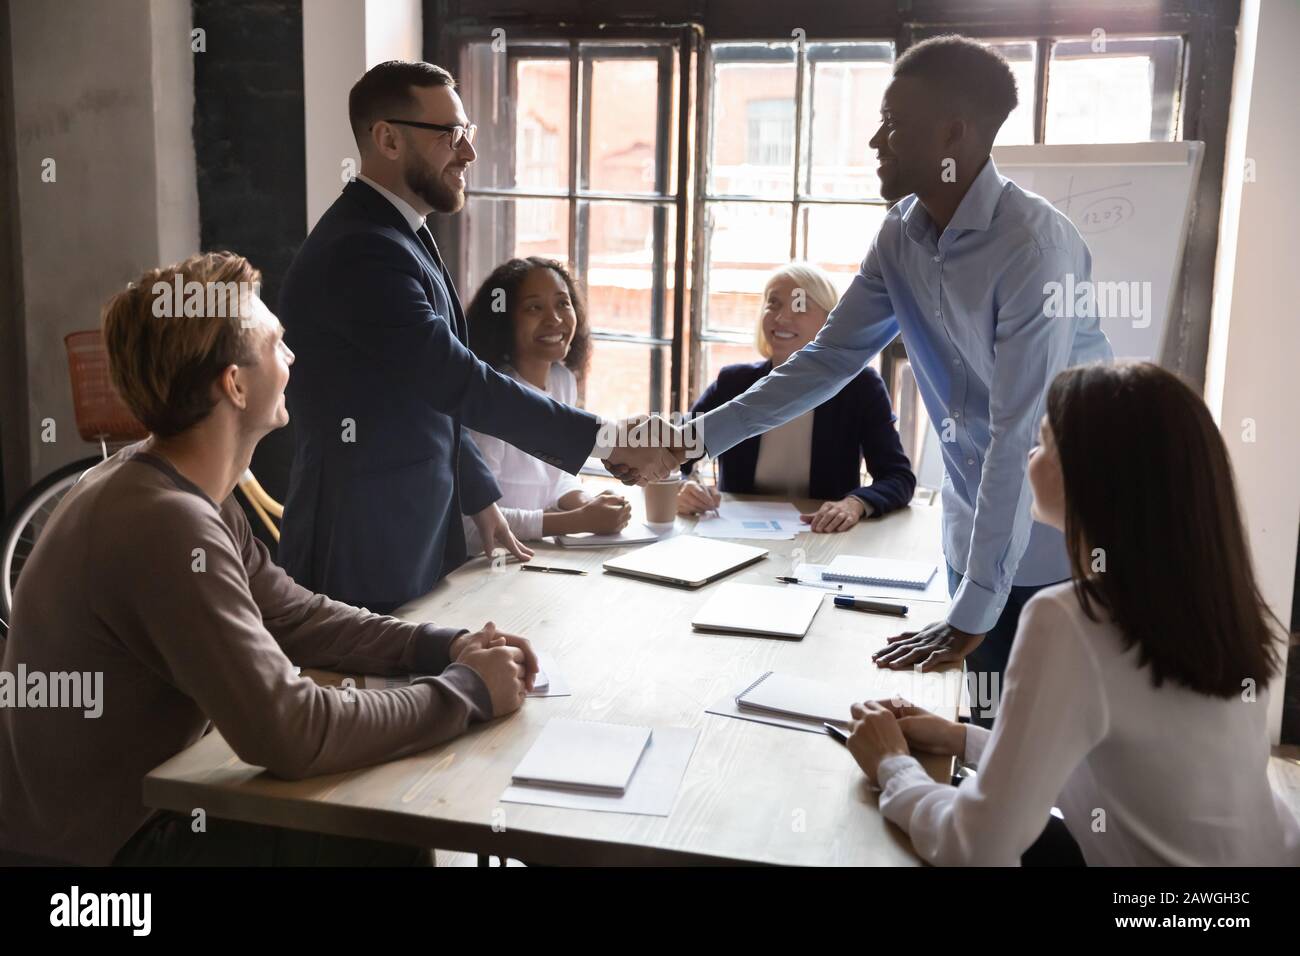 African caucasian ethnicity businessmen party leaders shaking hands starting negotiations Stock Photo